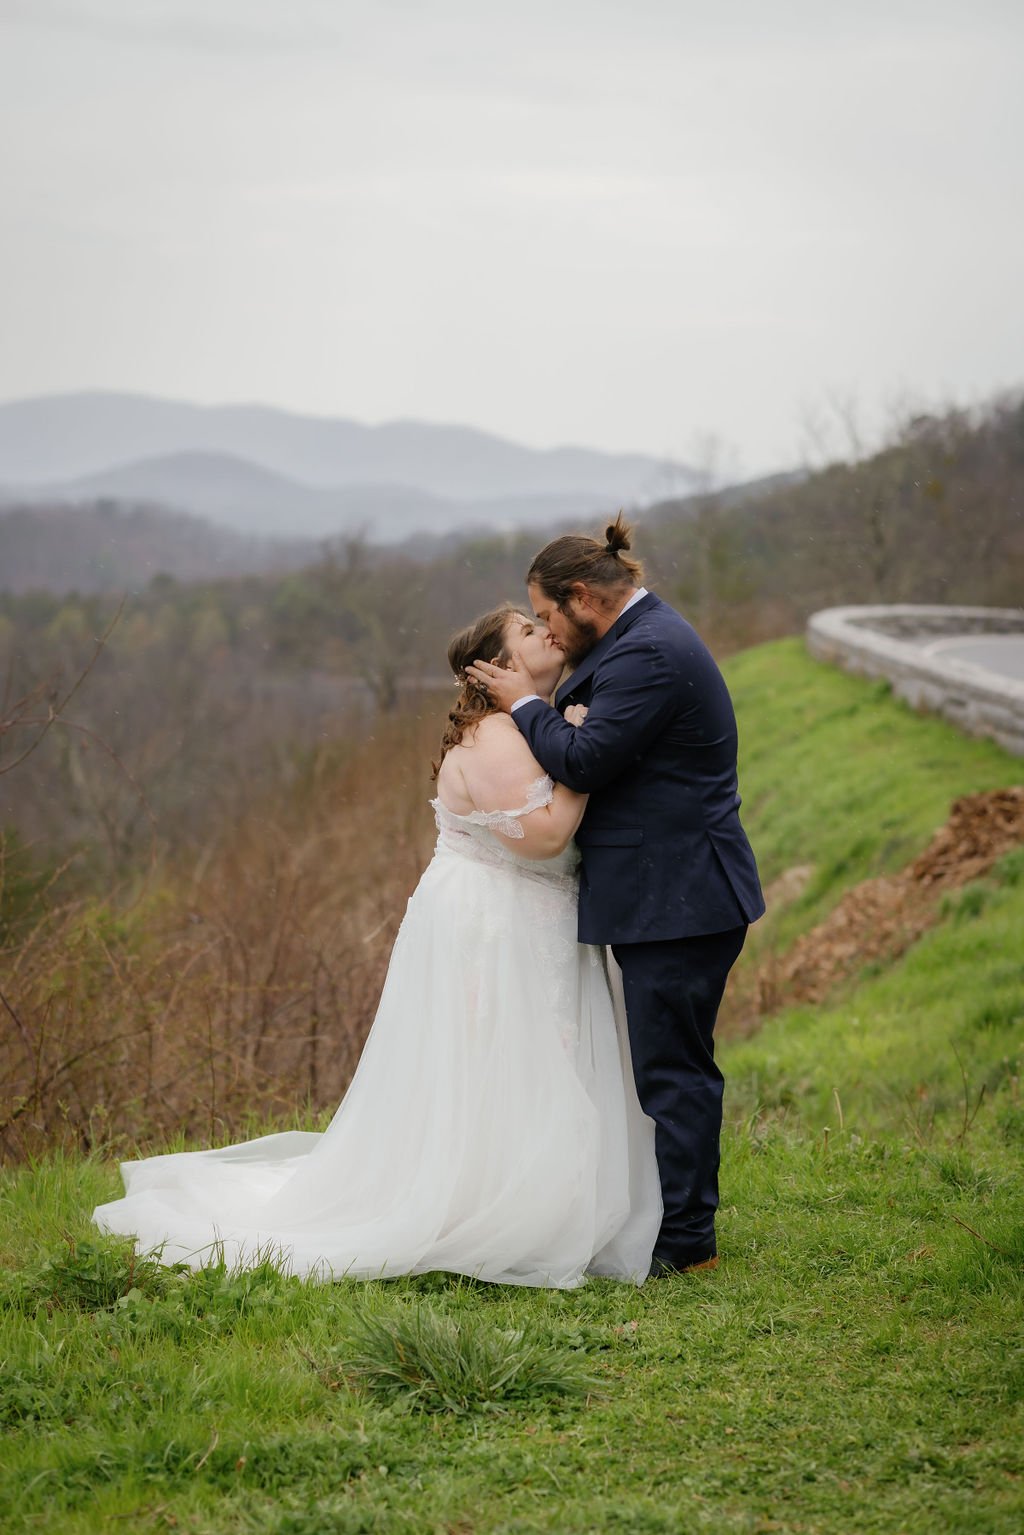 gatlinburg-photographer-5-signs-you-may-want-to-elope-to-gatlinburg-couple-kiss-while-overlooking-view